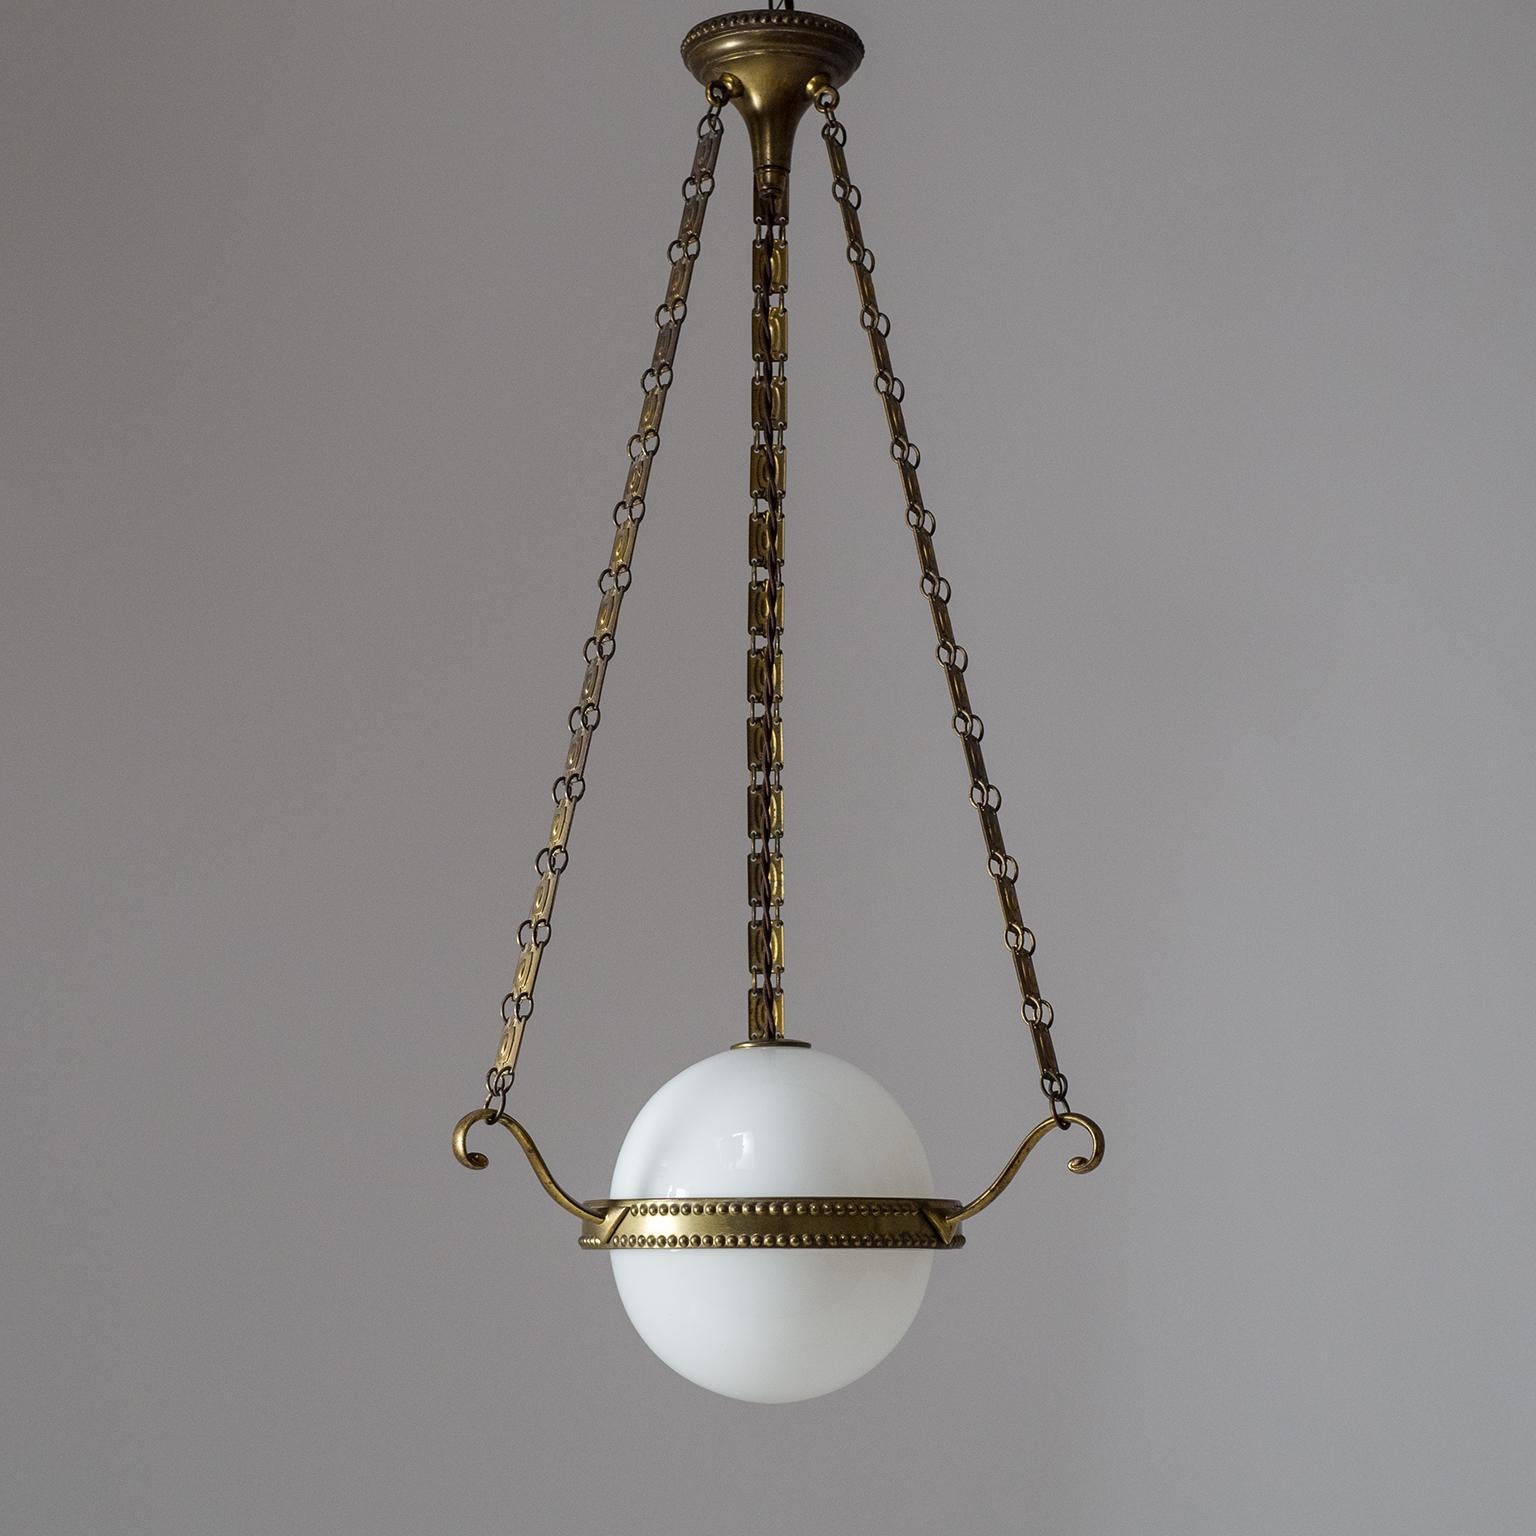 Splendid early 20th century Austrian brass and glass pendant. Intricately styled brass hardware suspended by three unique brass chains with a blown and cased glass diffuser appearing to float in the center. Wonderful original condition with a lovely